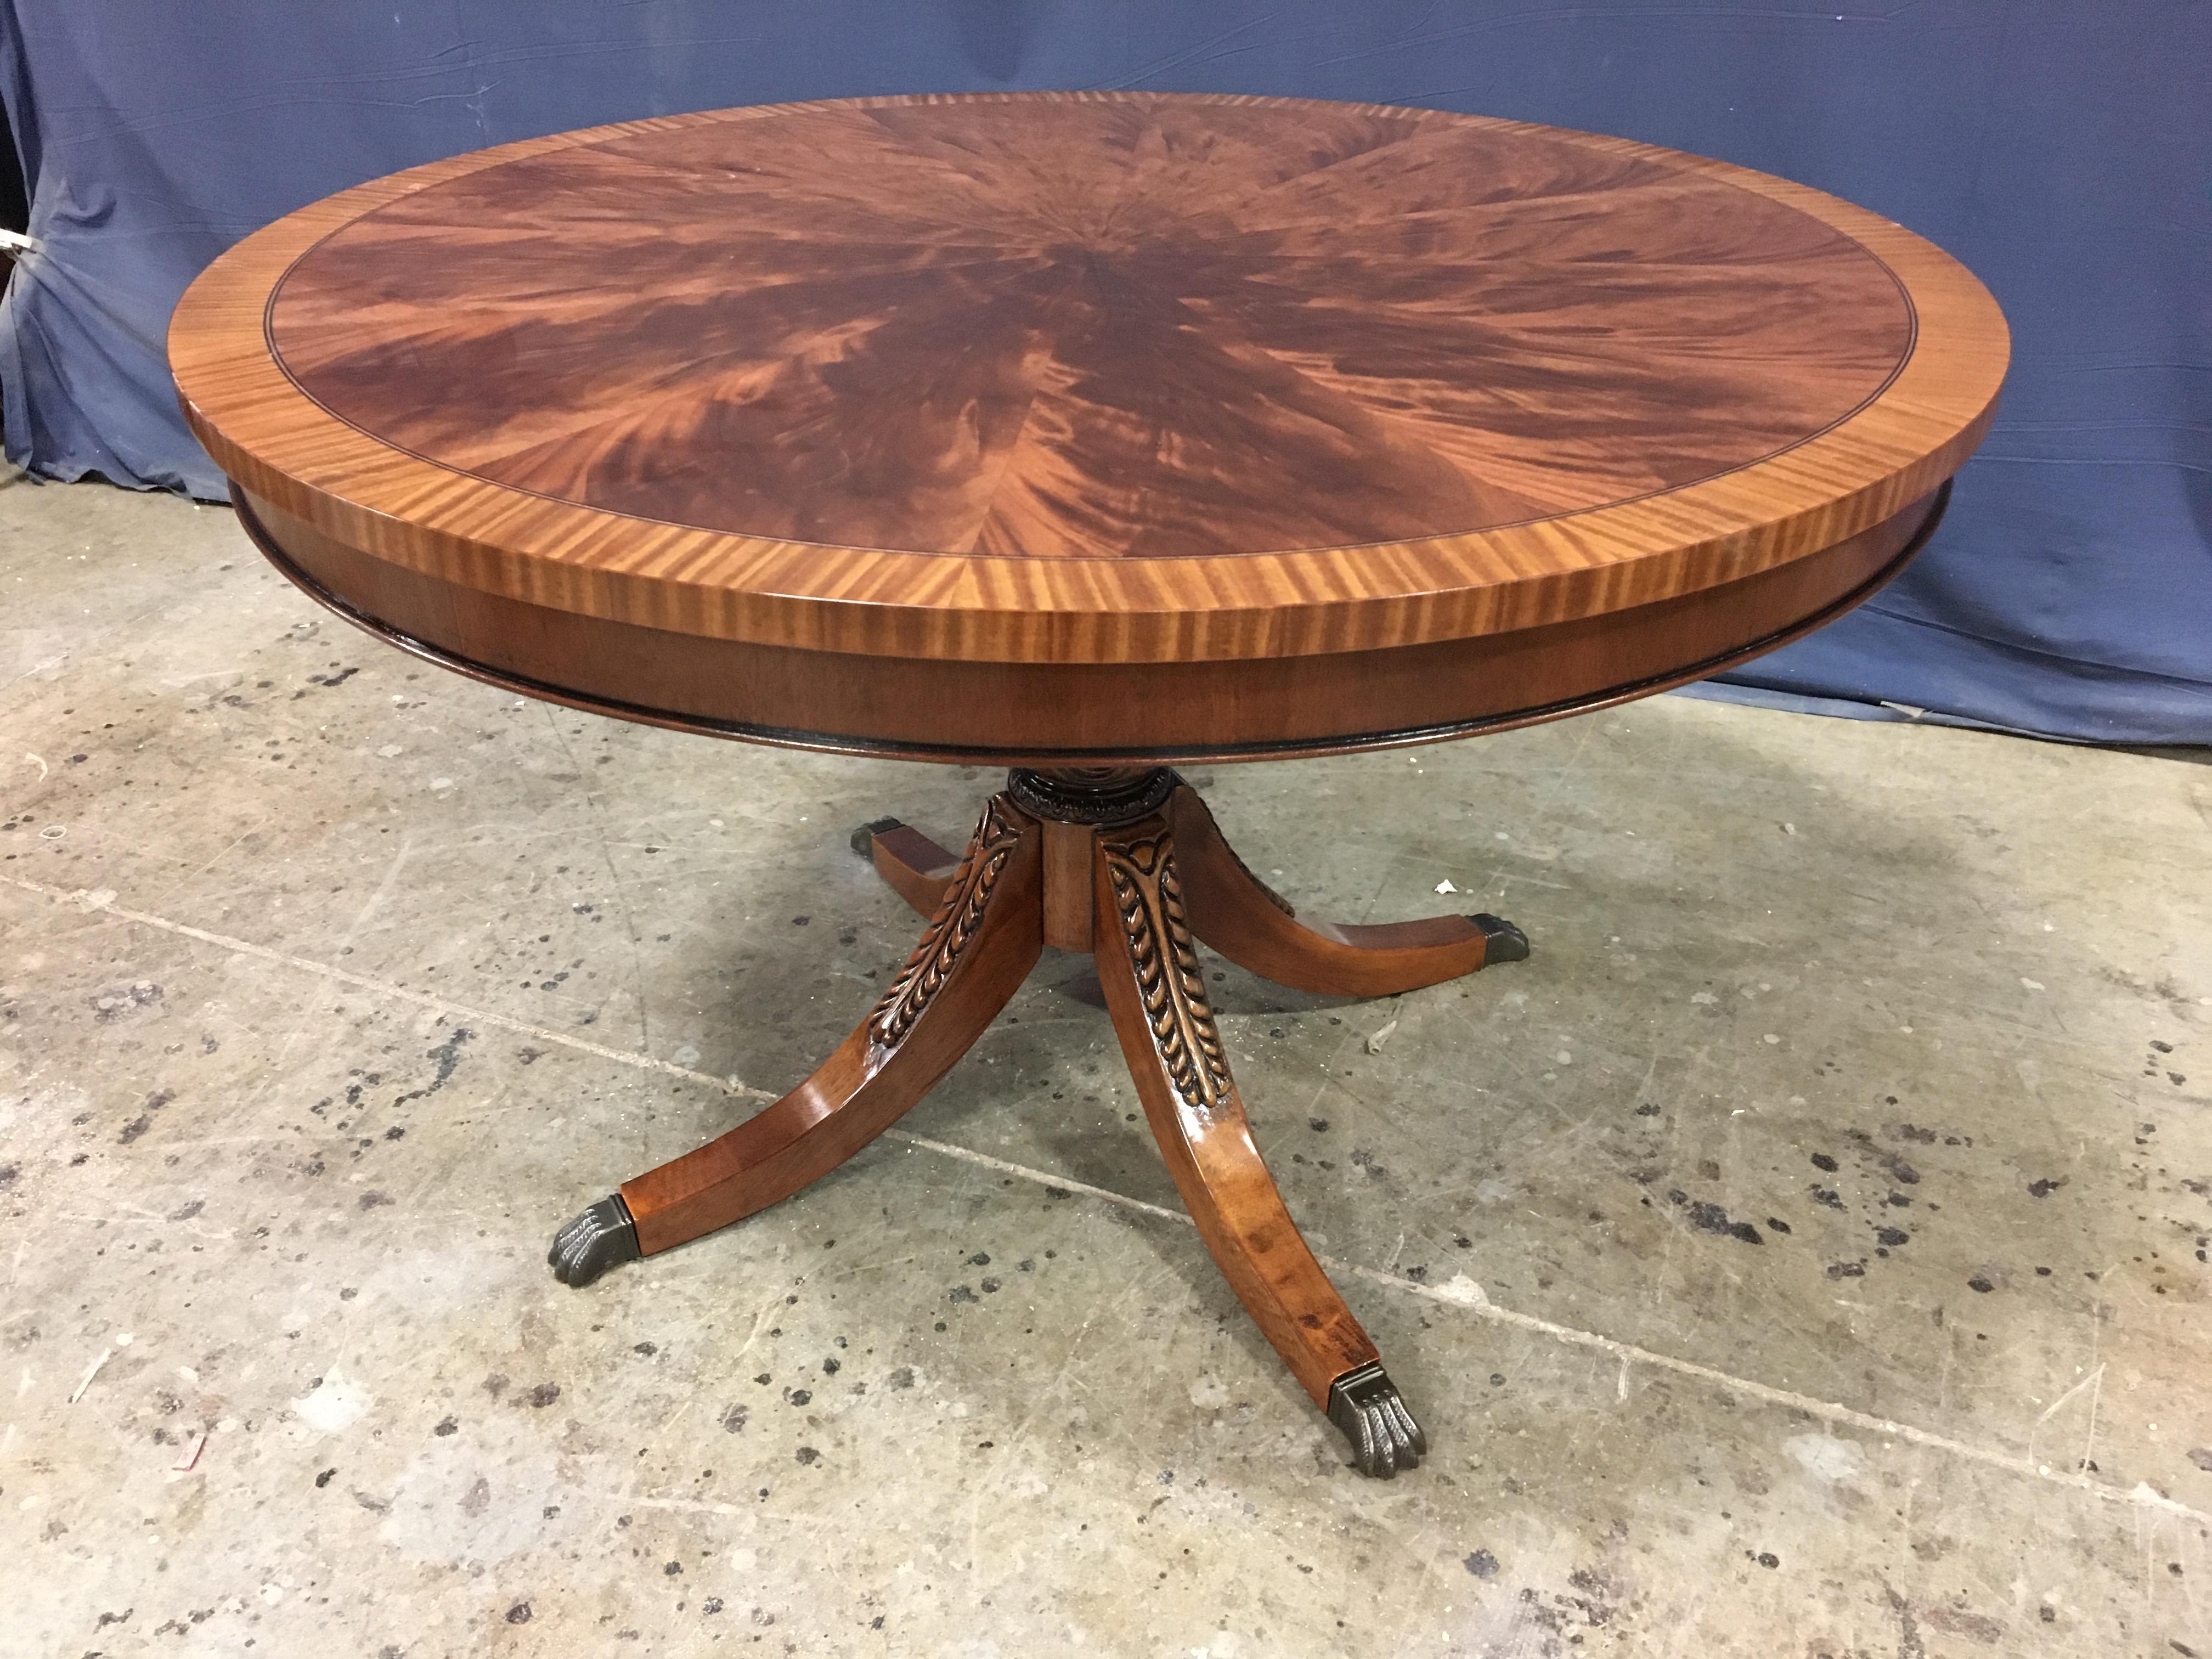 This is made to order round traditional mahogany foyer or dining table made in the Leighton Hall shop. It is ideal as a foyer table, breakfast table or dining table for an apartment or condo. It features field of radial cut West African swirly